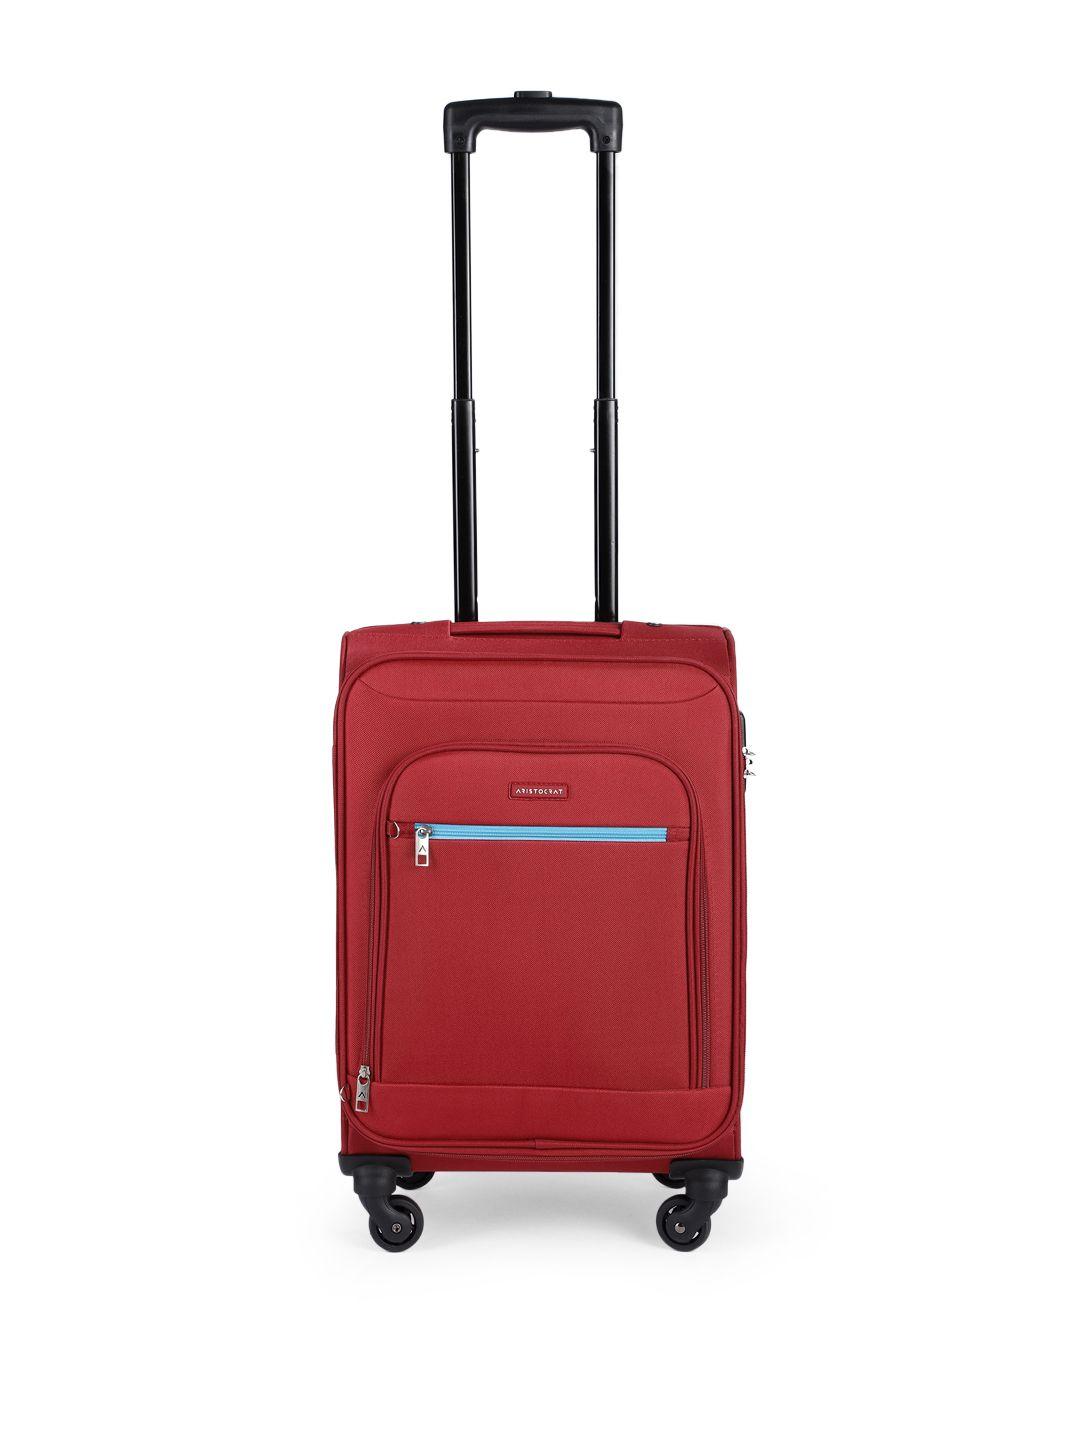 Aristocrat Bright Red Solid Nile Exp Strolly 54 Cabin Trolley Suitcase